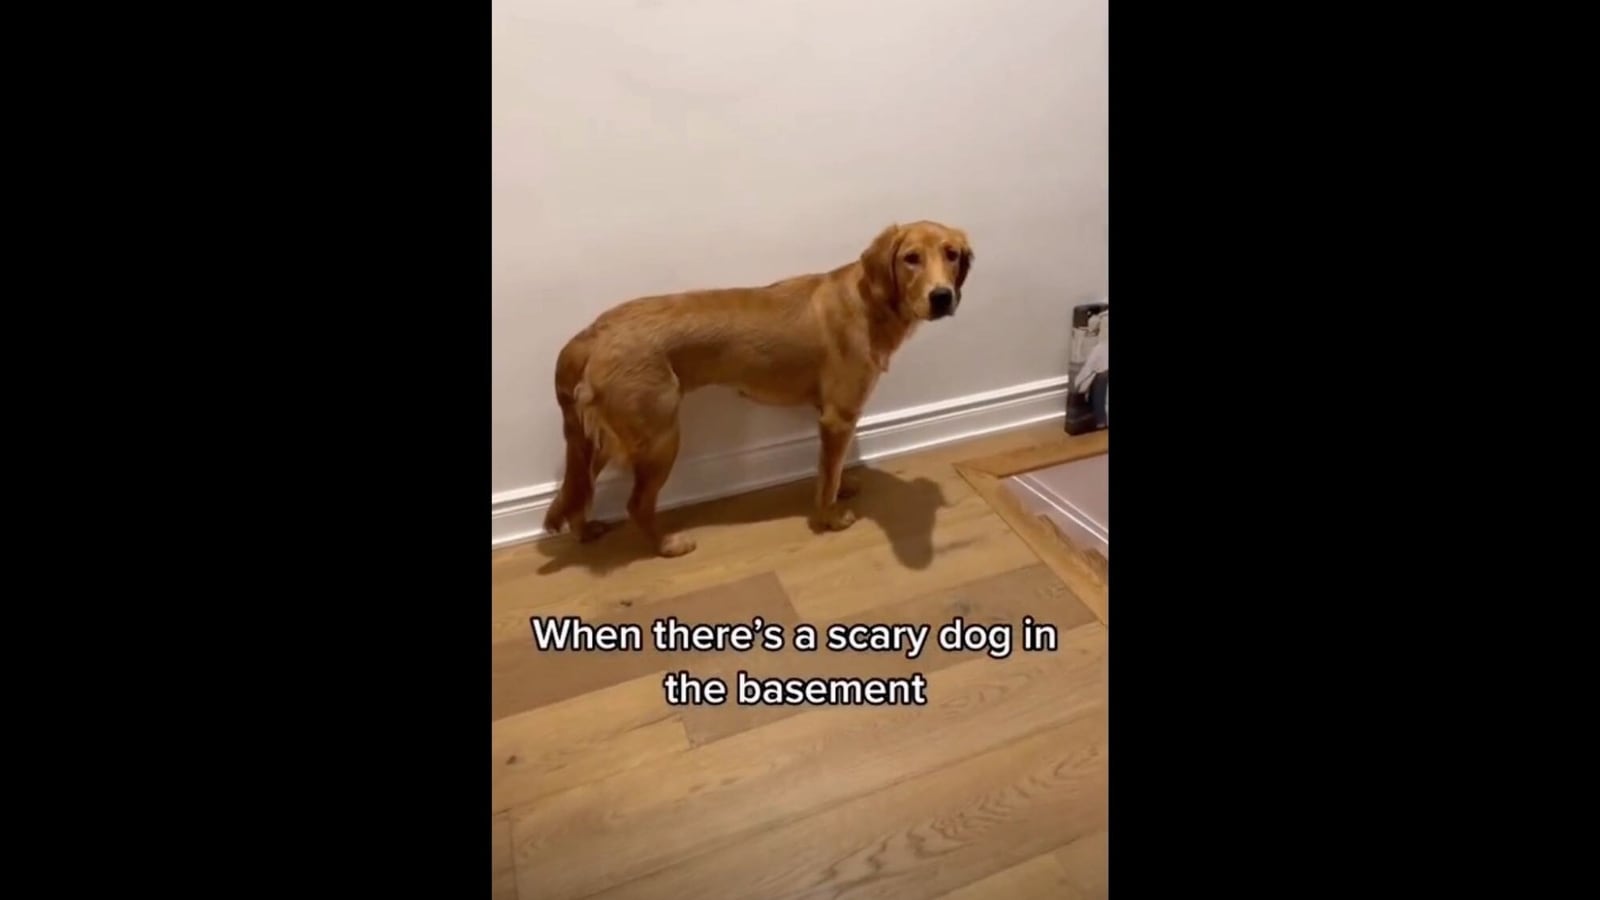 Golden Retrievers get scared by another ‘dog’ hiding in the basement. Watch hilarious video